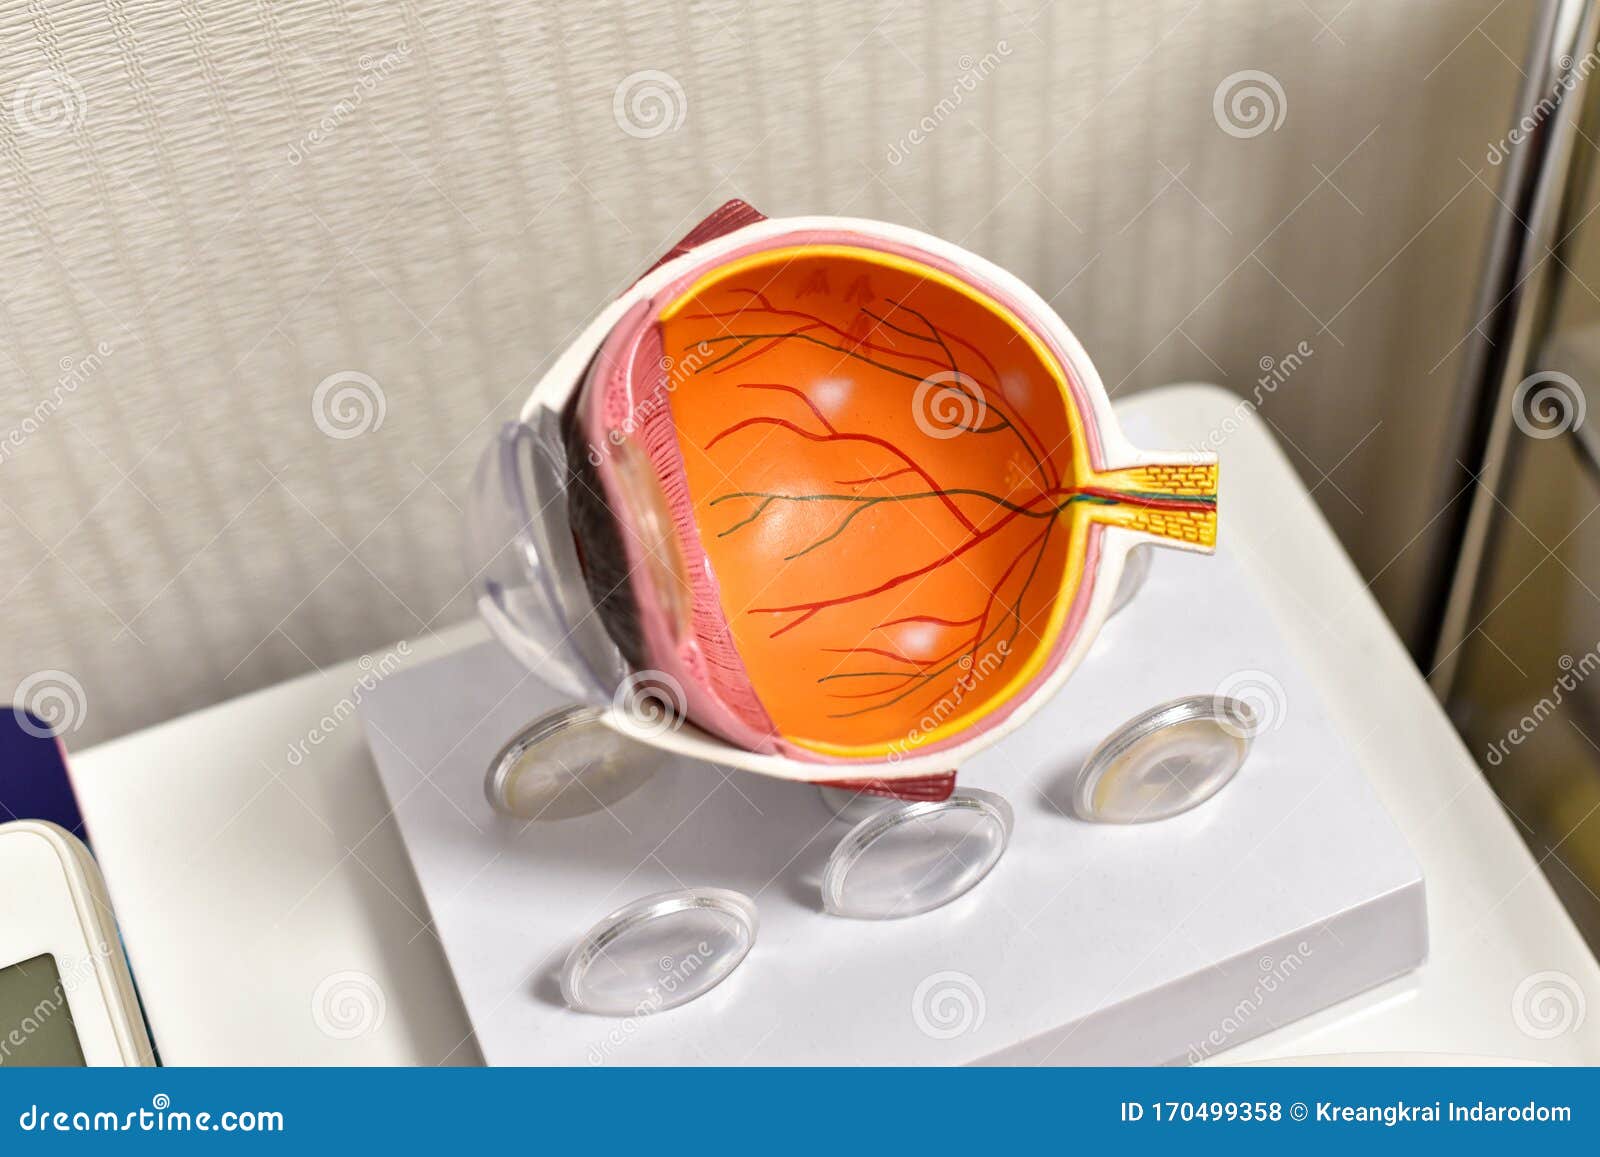 eye anatomy, human eye cross section physiology, model of cornea and lens for ophthalmologist.